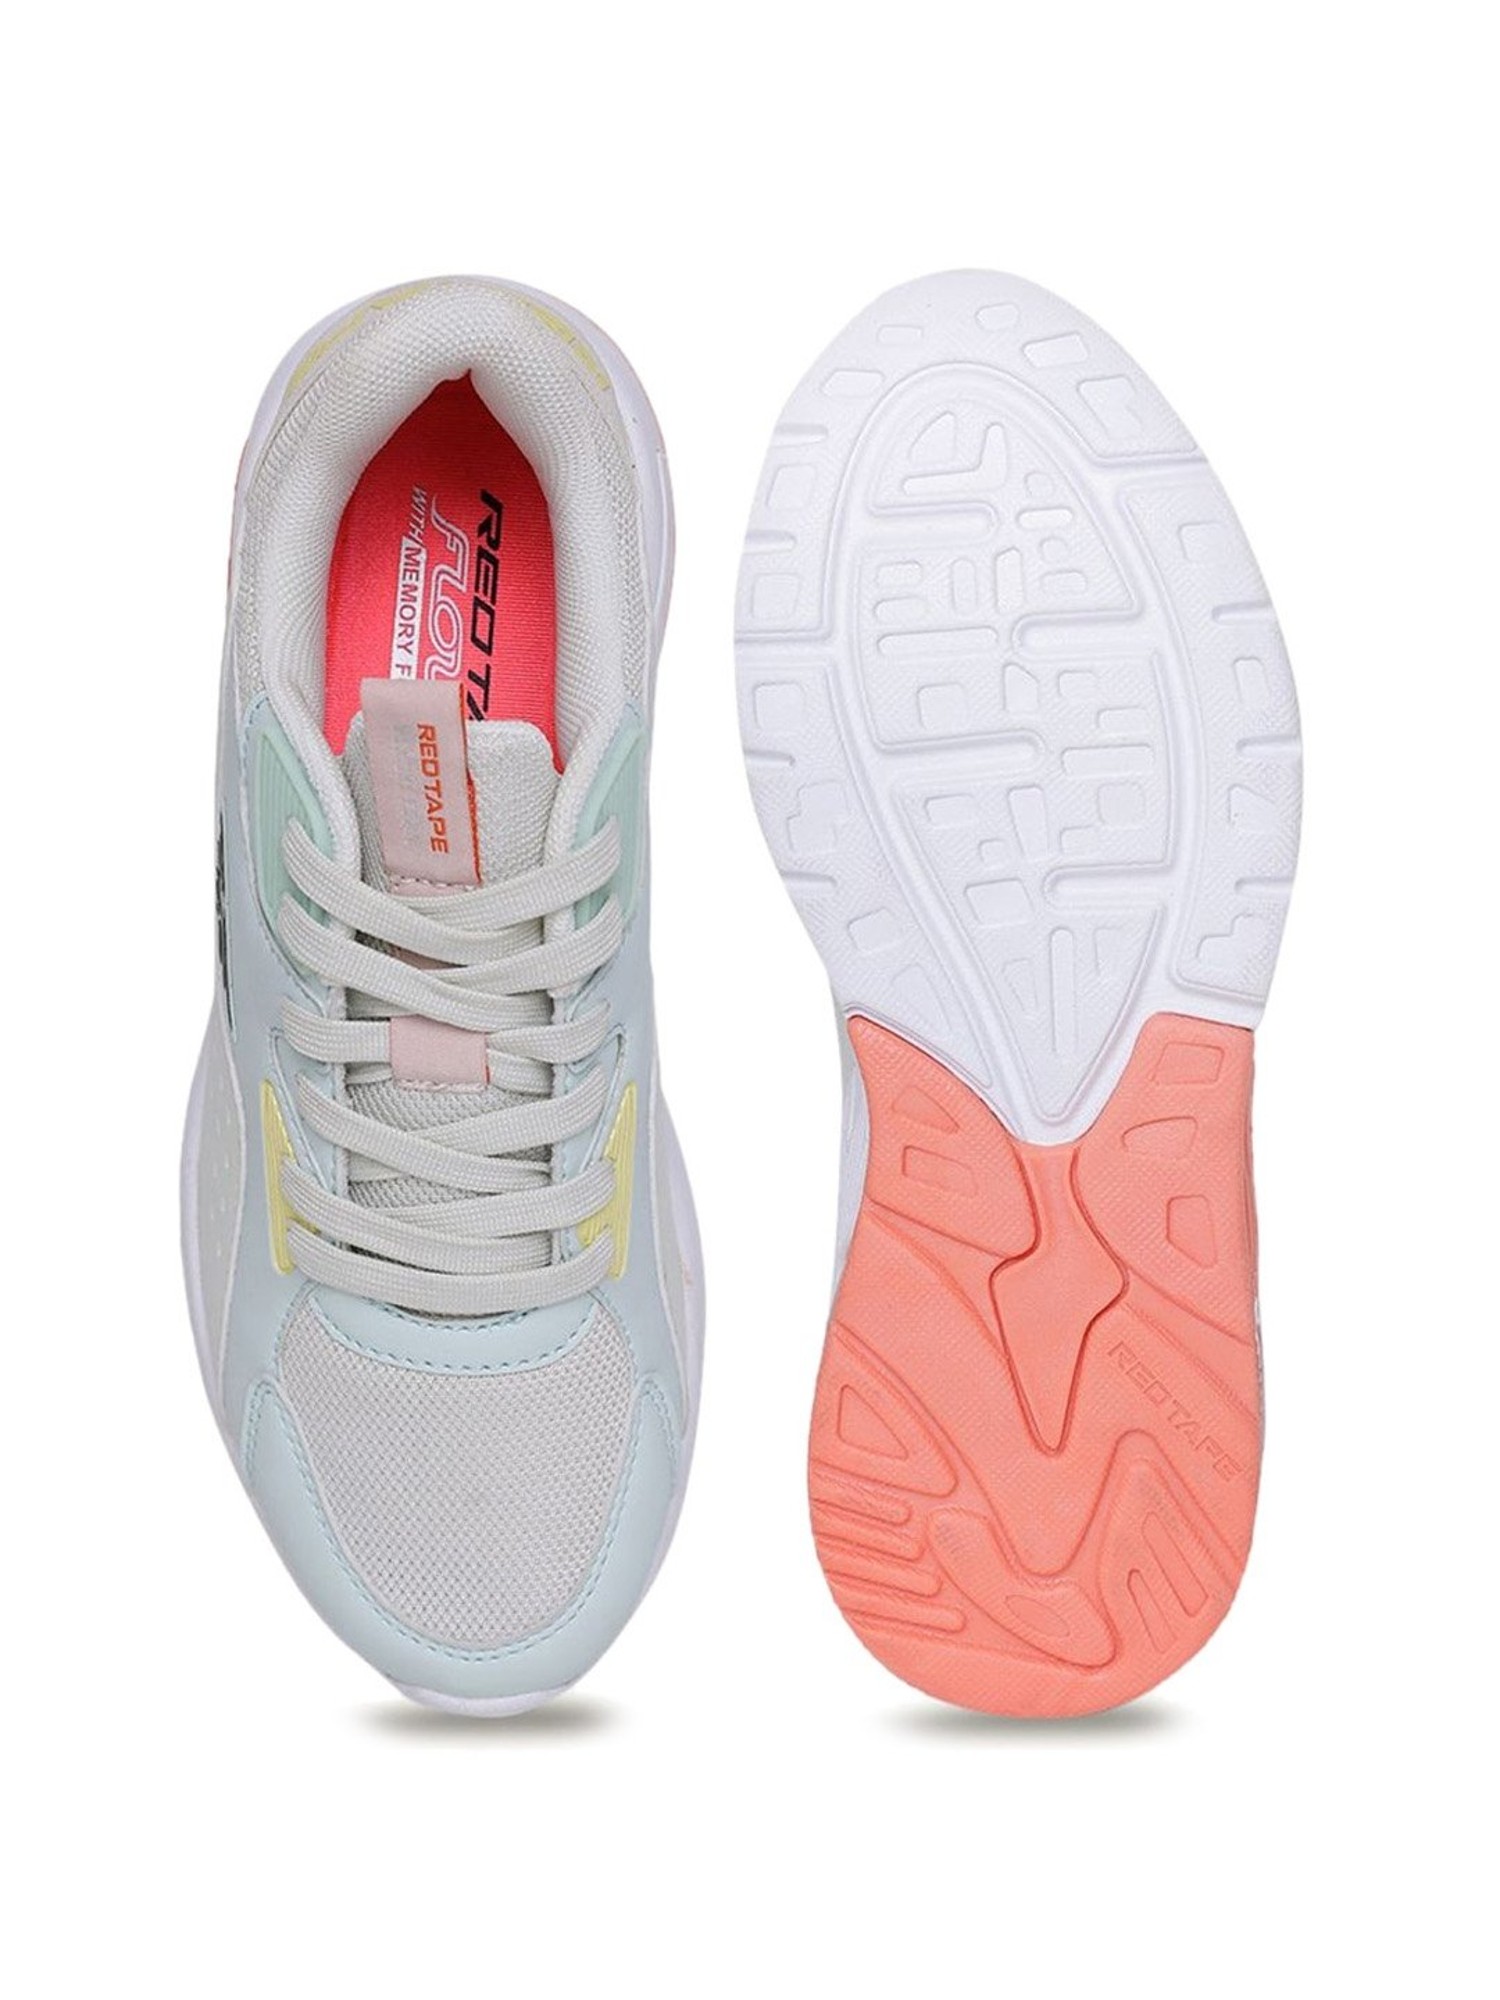 Details more than 106 redtape sneakers for women latest